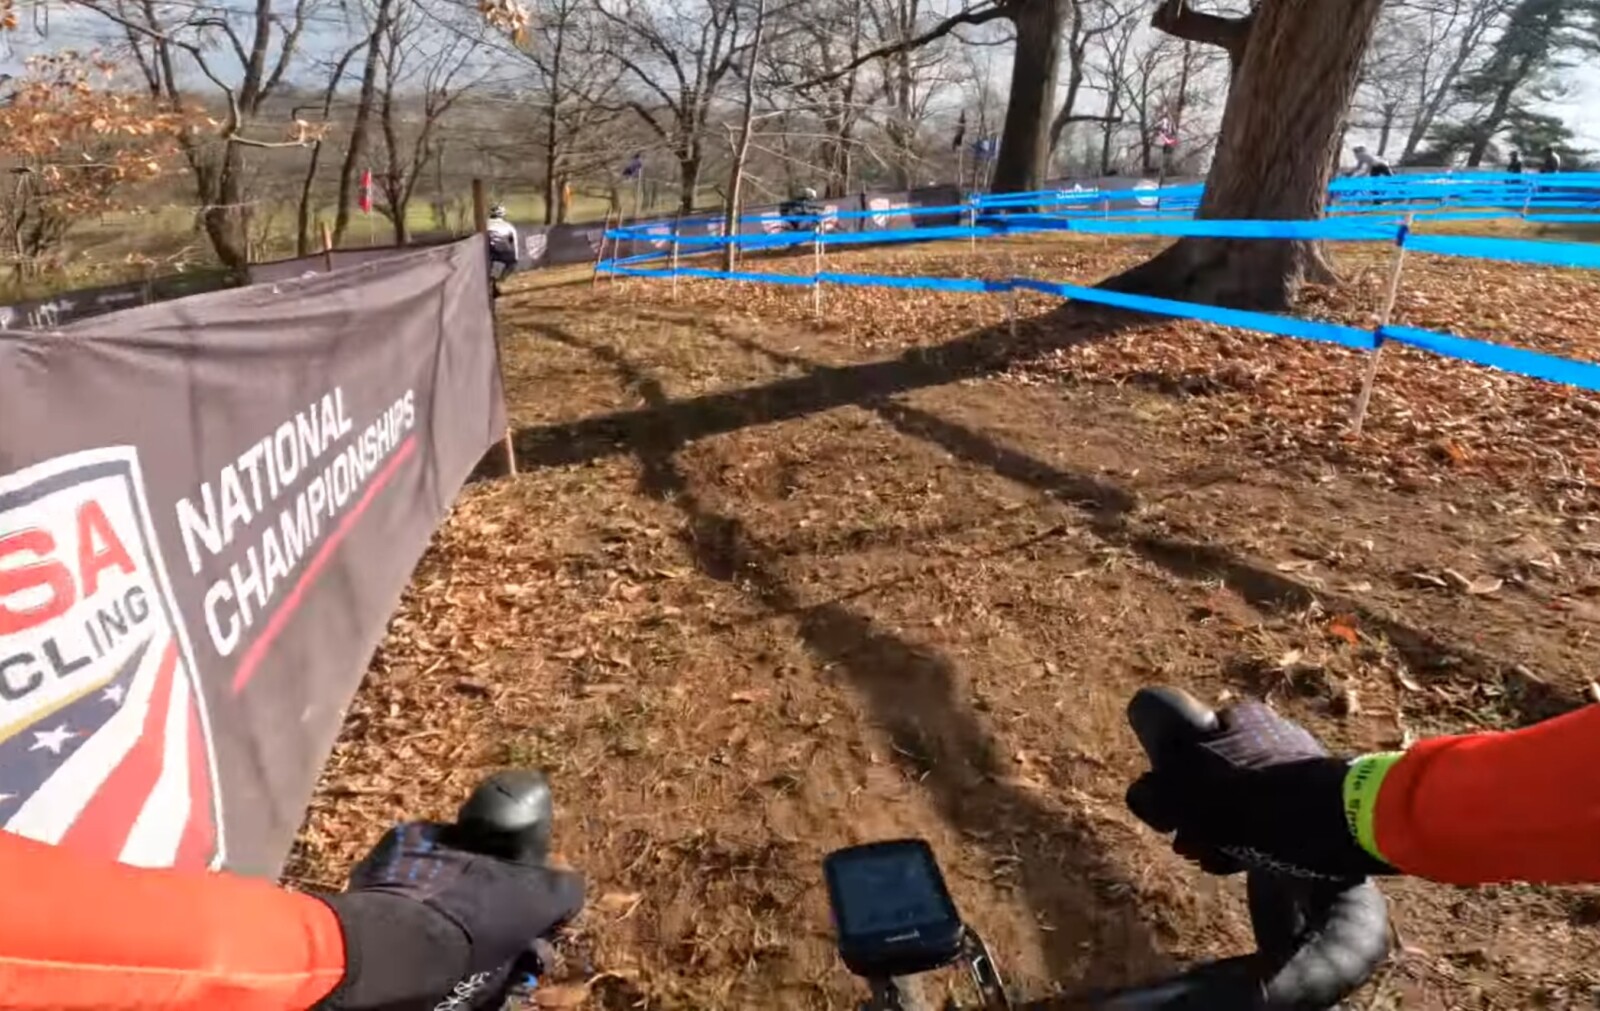 2023 USA Cycling Cyclocross National Championships Course Preview Video V2 with Drew Dillman